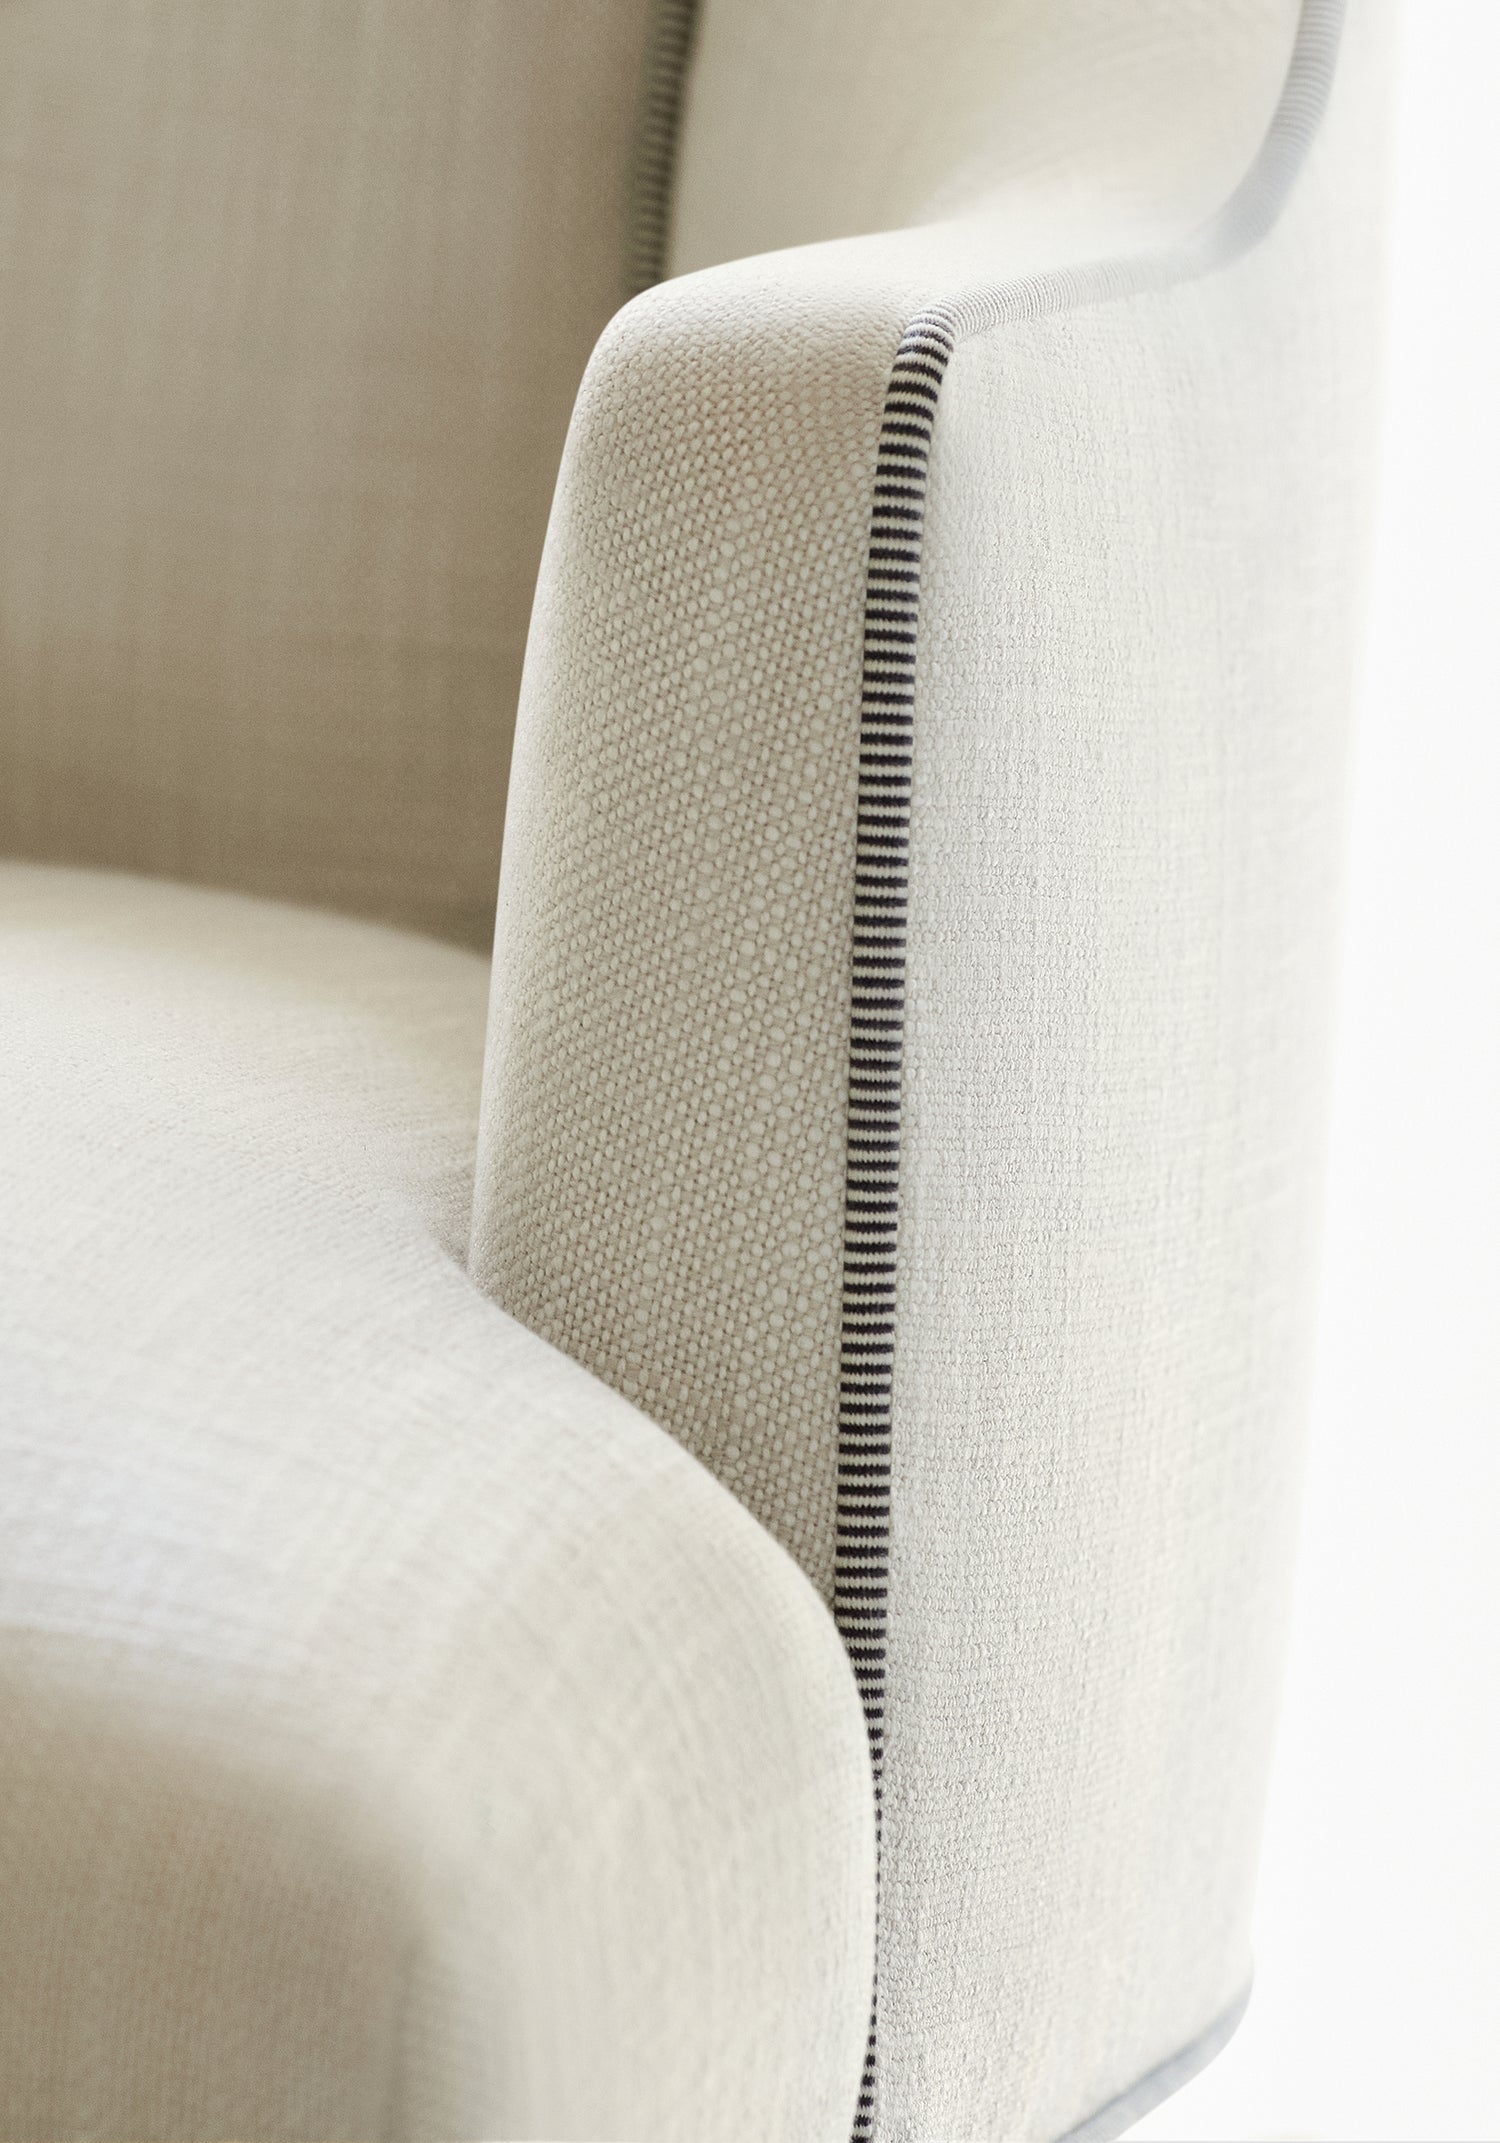 Detail of Palisades Dining Chair in Bristol woven fabric in flax color with onyx trim - pattern number W73416 - by Thibaut in the Landmark Textures collection